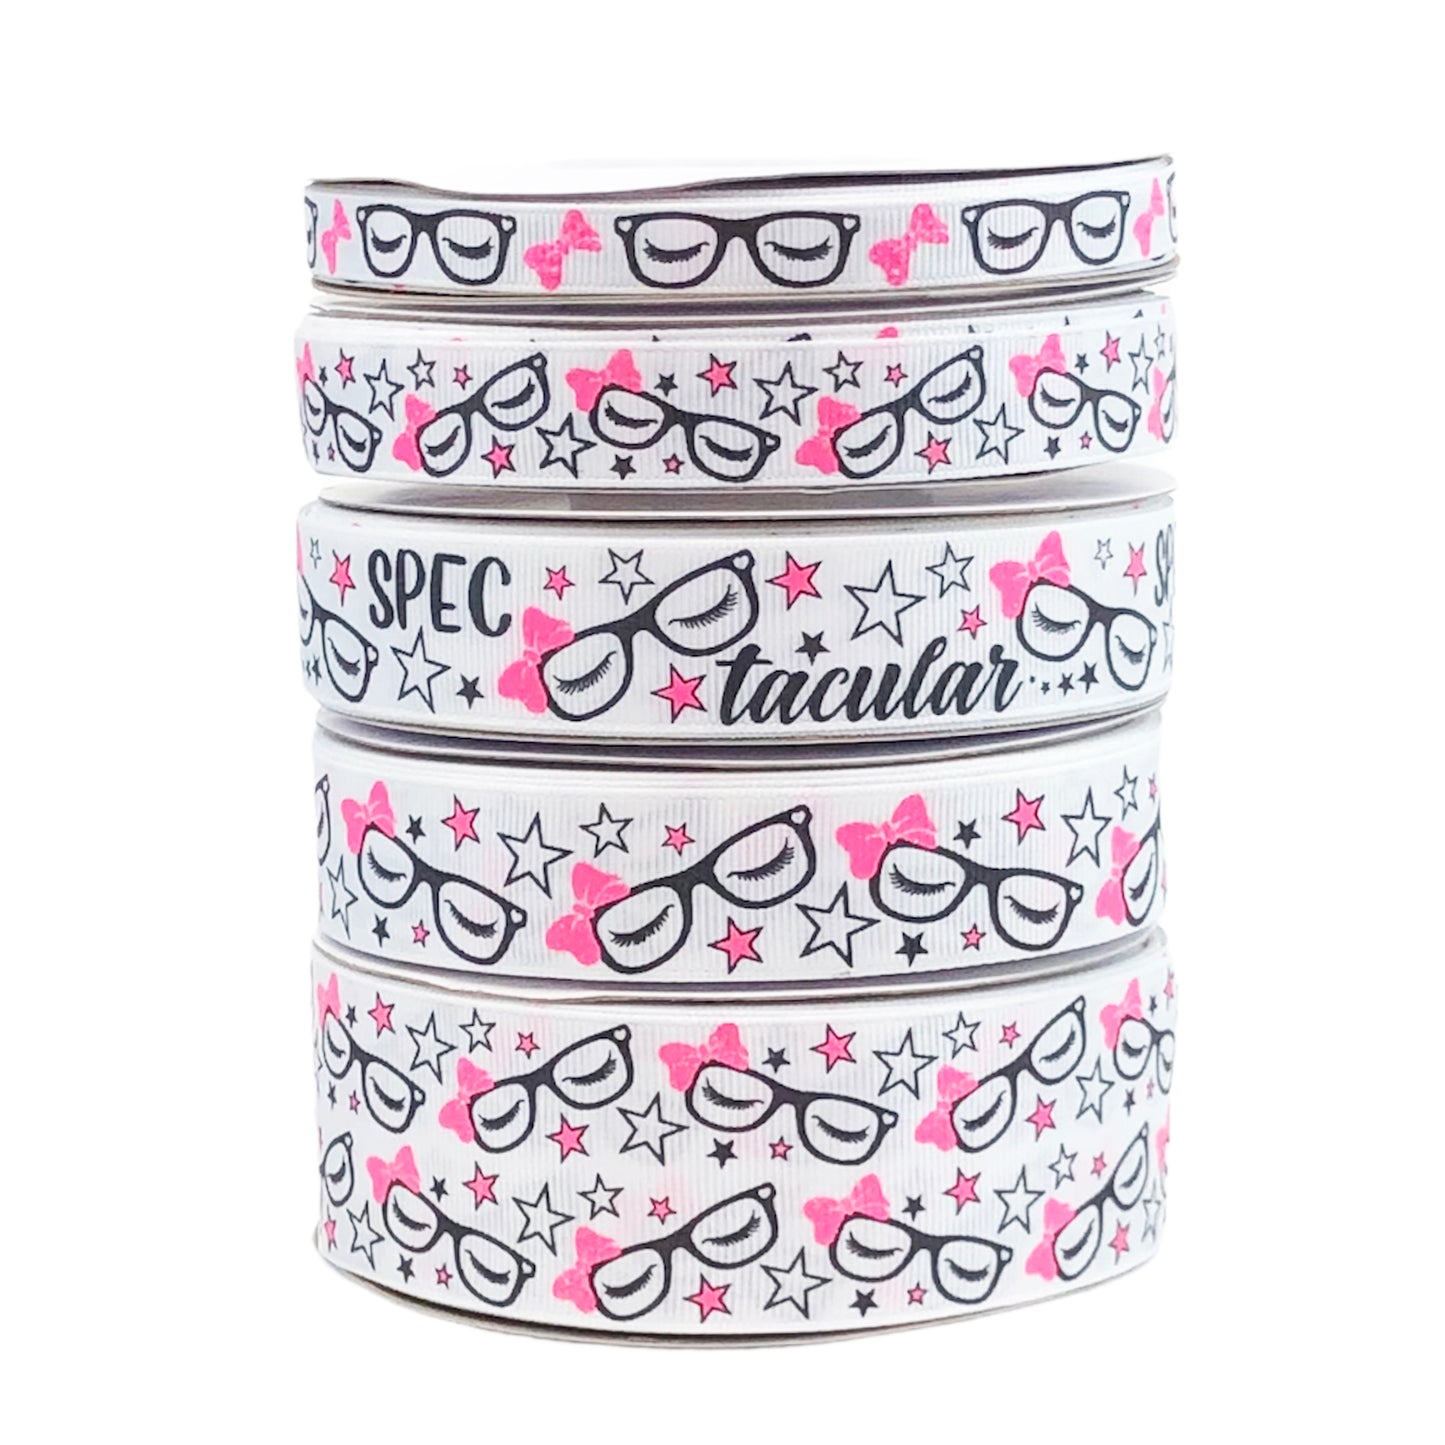 Spectacular Grosgrain Ribbon Collection On White